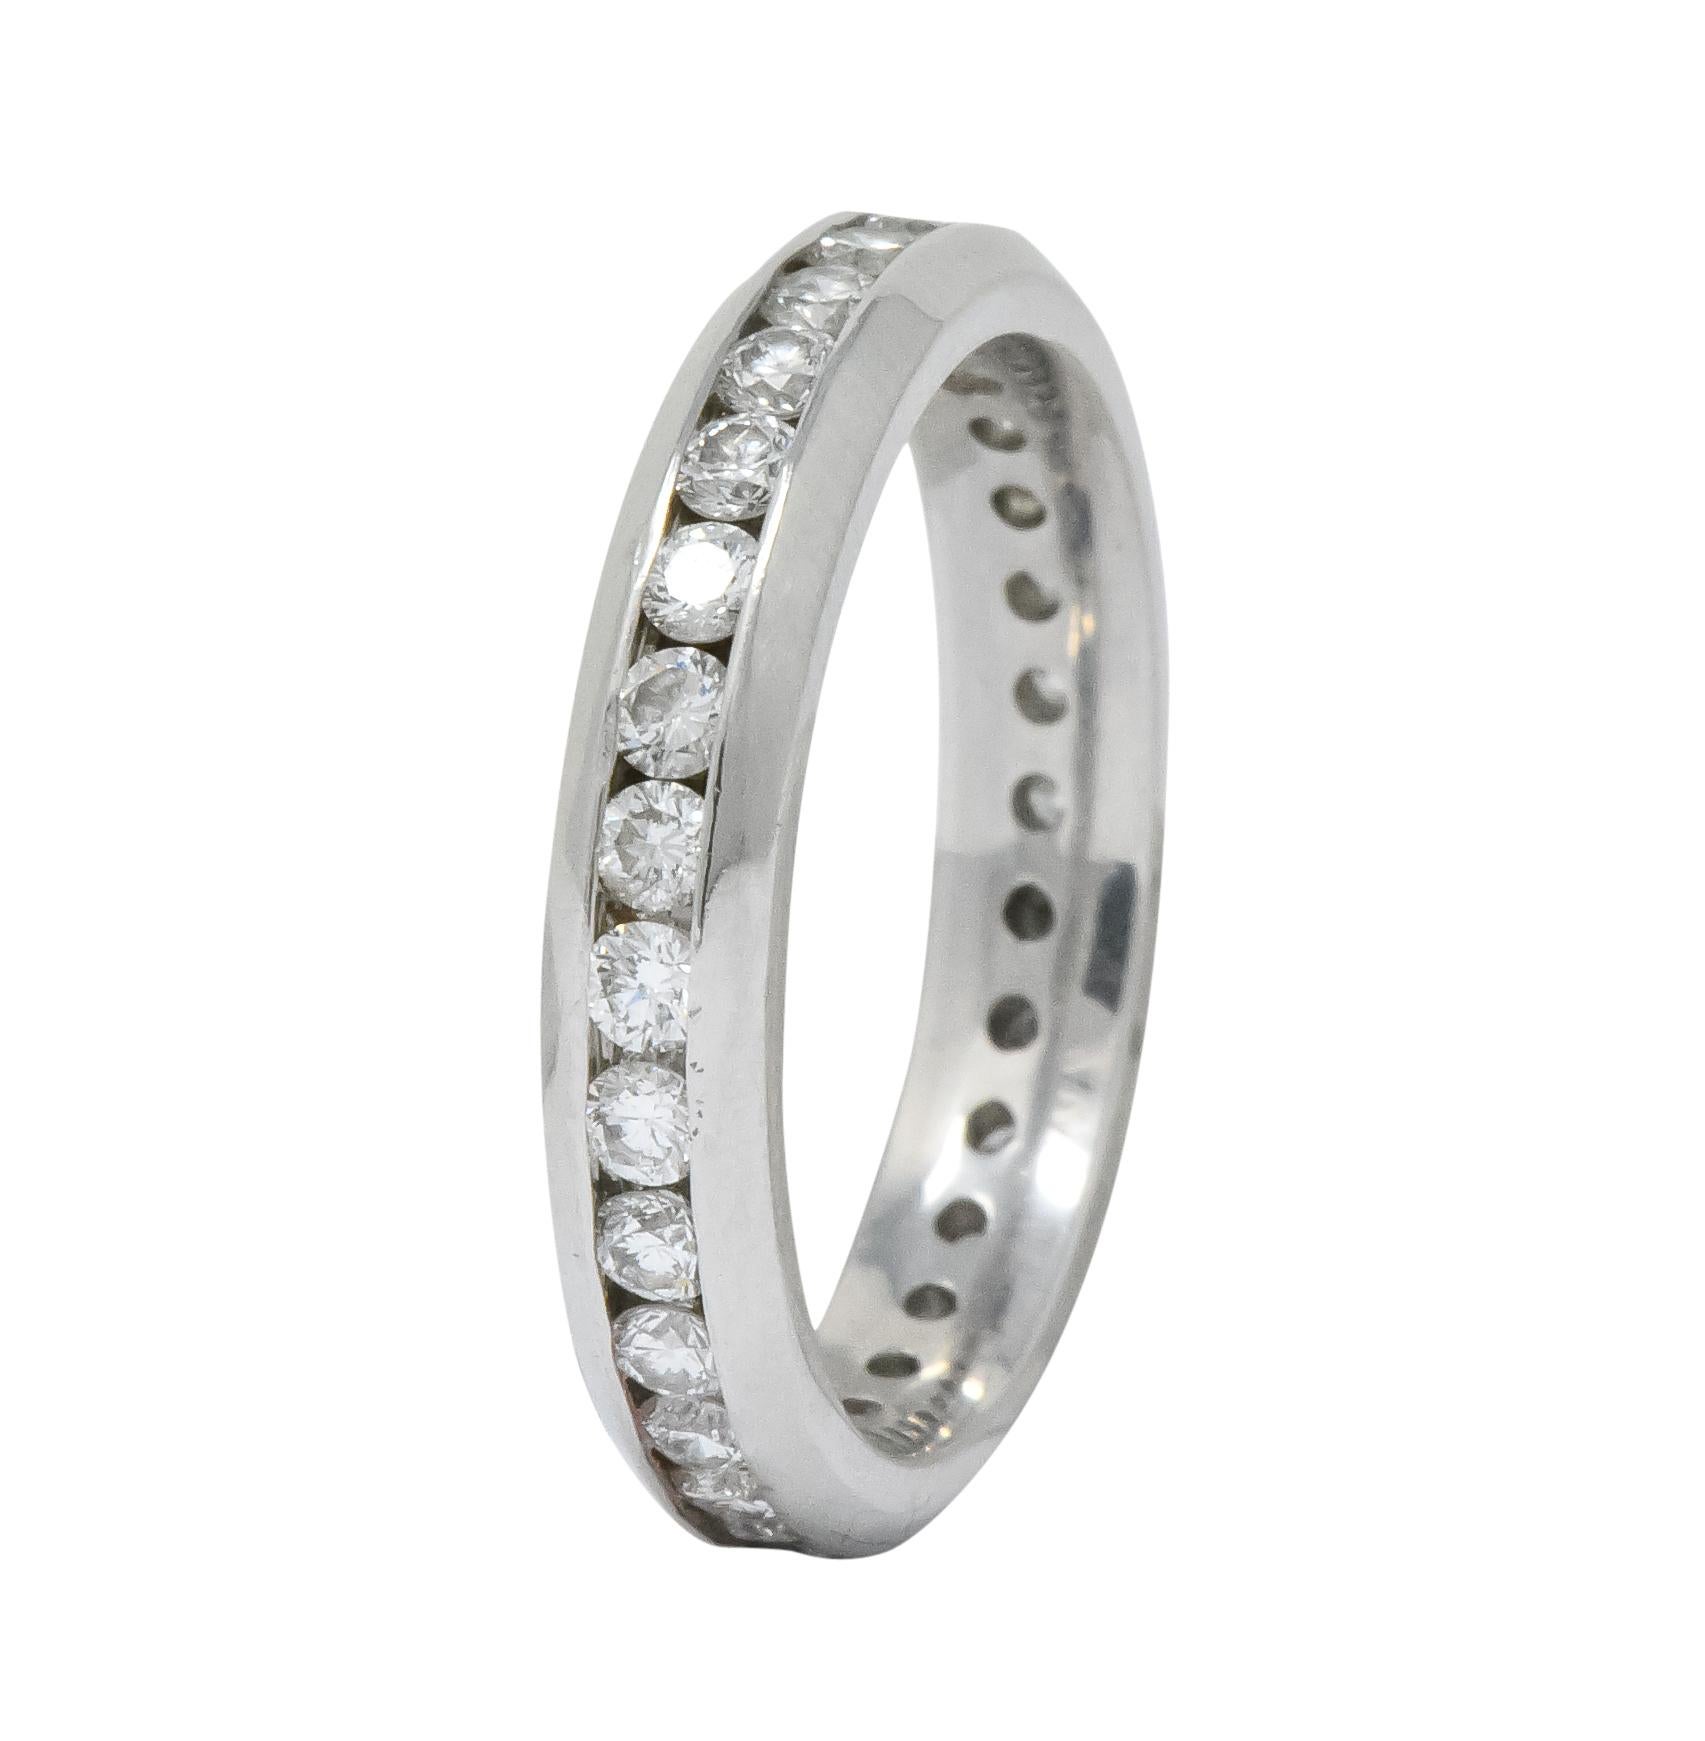  Featuring channel set round brilliant cut diamonds throughout entire band surface weighing approximately 0.60 carat total, H/I color and VS to SI clarity

With high polished finish and channel edges that taper to flat profile edge

Maker's mark for